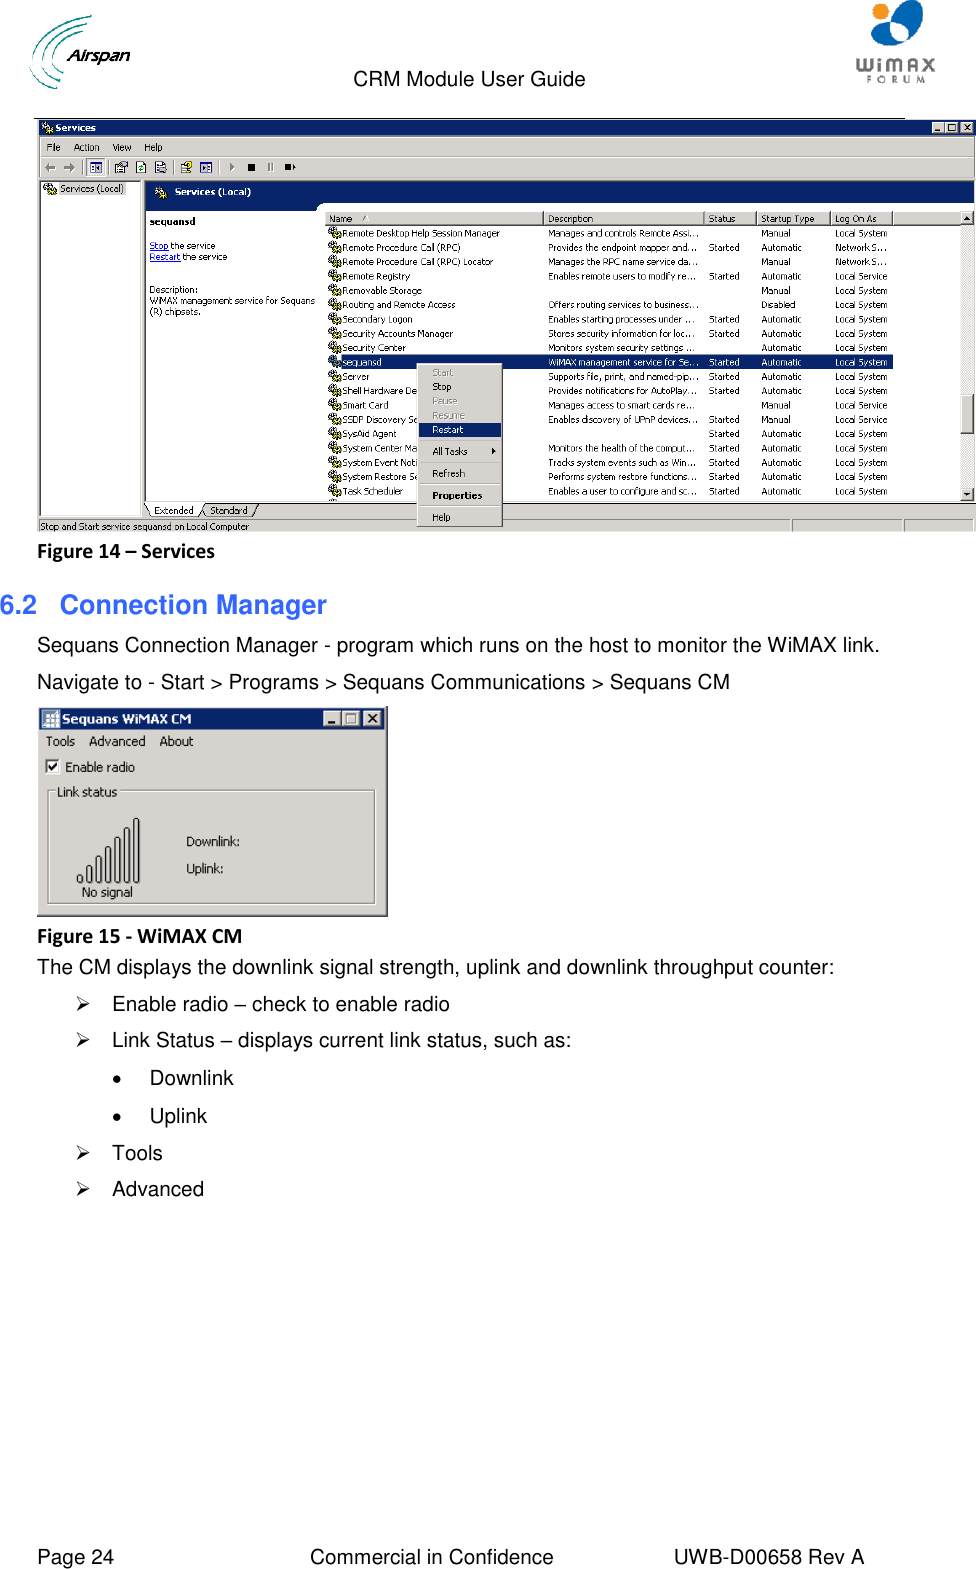                                  CRM Module User Guide     Page 24  Commercial in Confidence  UWB-D00658 Rev A     Figure 14 – Services 6.2 Connection Manager Sequans Connection Manager - program which runs on the host to monitor the WiMAX link. Navigate to - Start &gt; Programs &gt; Sequans Communications &gt; Sequans CM  Figure 15 - WiMAX CM The CM displays the downlink signal strength, uplink and downlink throughput counter:   Enable radio – check to enable radio   Link Status – displays current link status, such as:   Downlink   Uplink   Tools   Advanced   